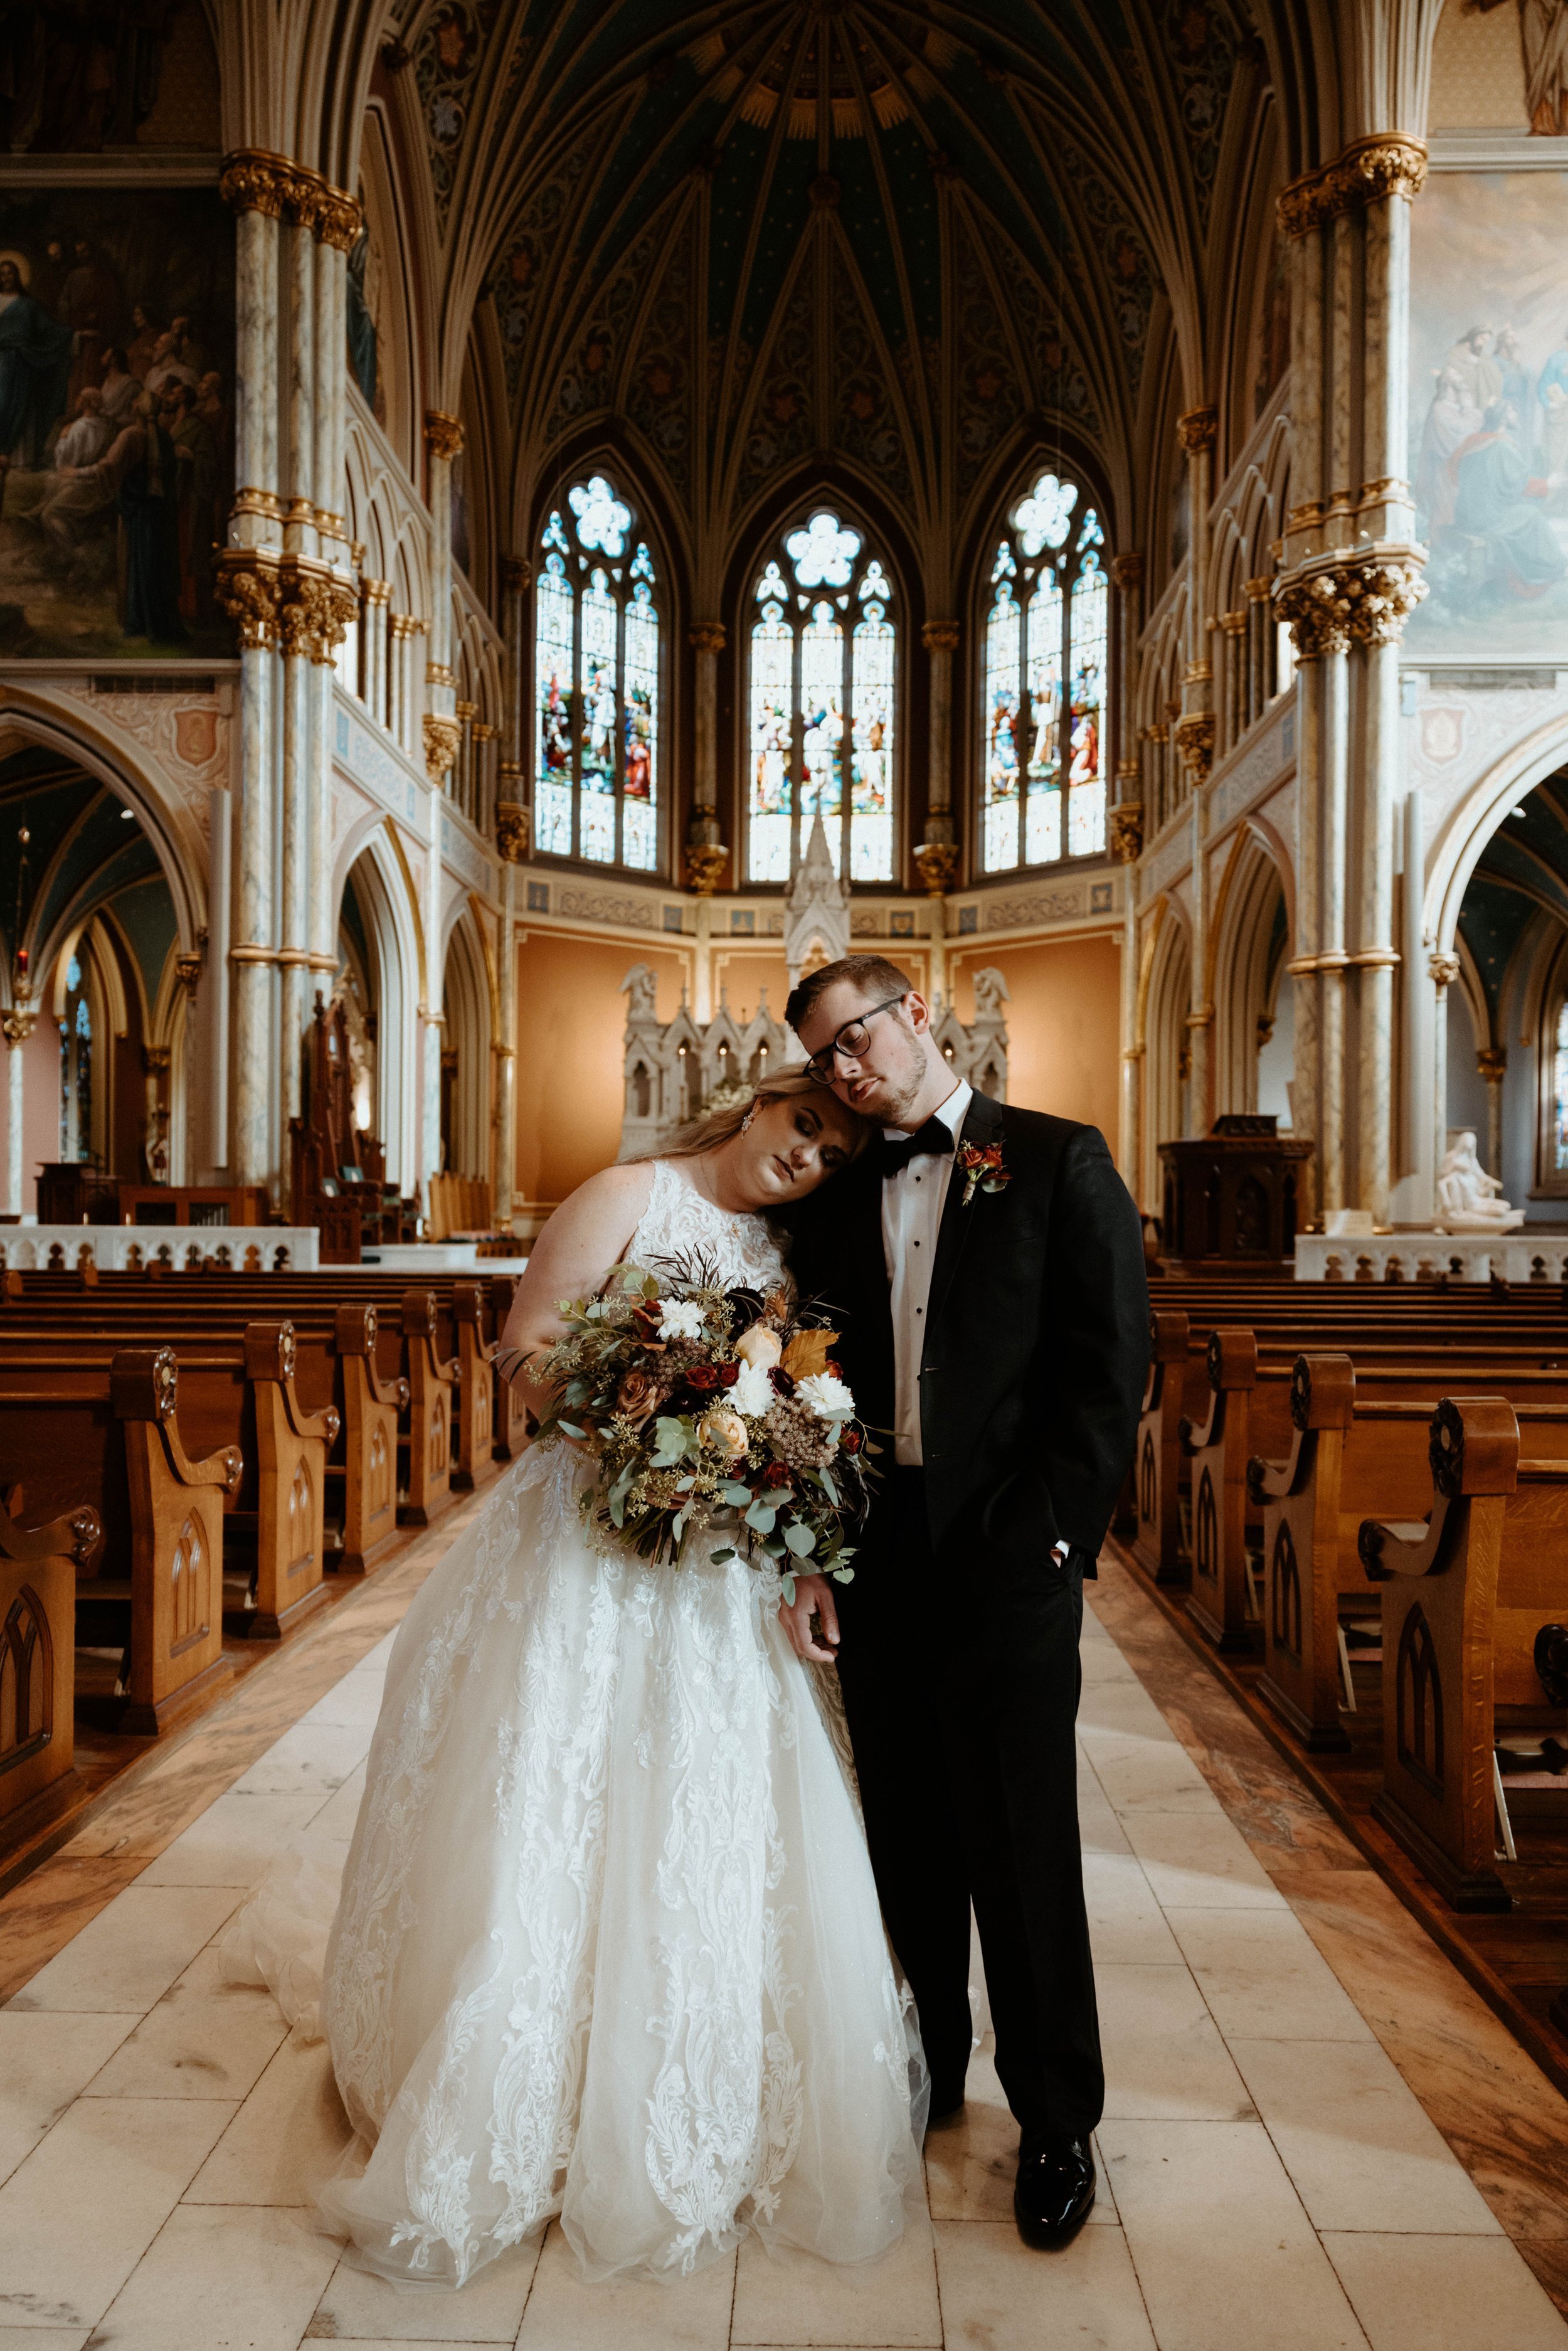 Ivory-and-beau-bride-ansley-bought-sparkly-and-traditional-highneck-ballgown-at-savannah-bridal-shop-gets-married-at-cathedral-with-the-help-of-ivory-and-beau-who-created-floral-peices-for-the-ceremony-and-reception-in-their-savannah-florwer-shop-9.jpg